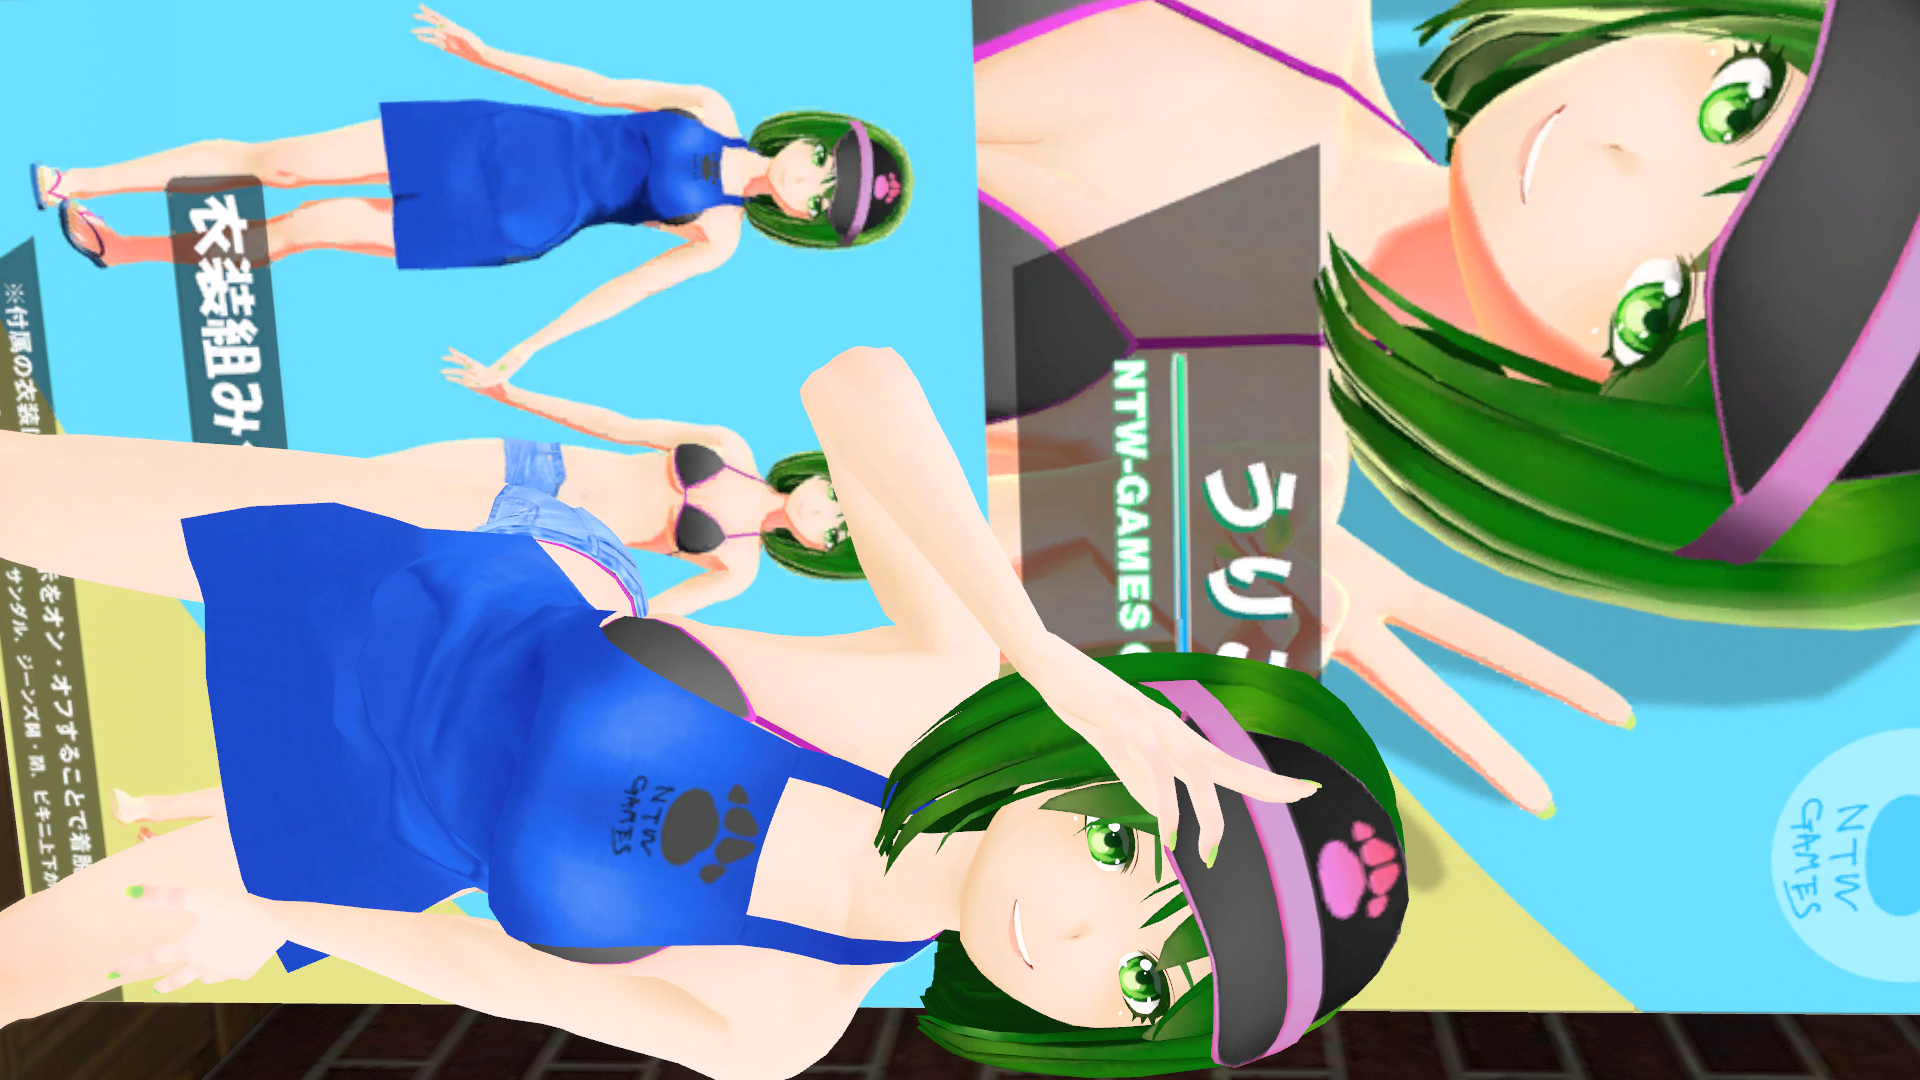 VRChat_1920x1080_2021-12-05_05-06-22.428.png